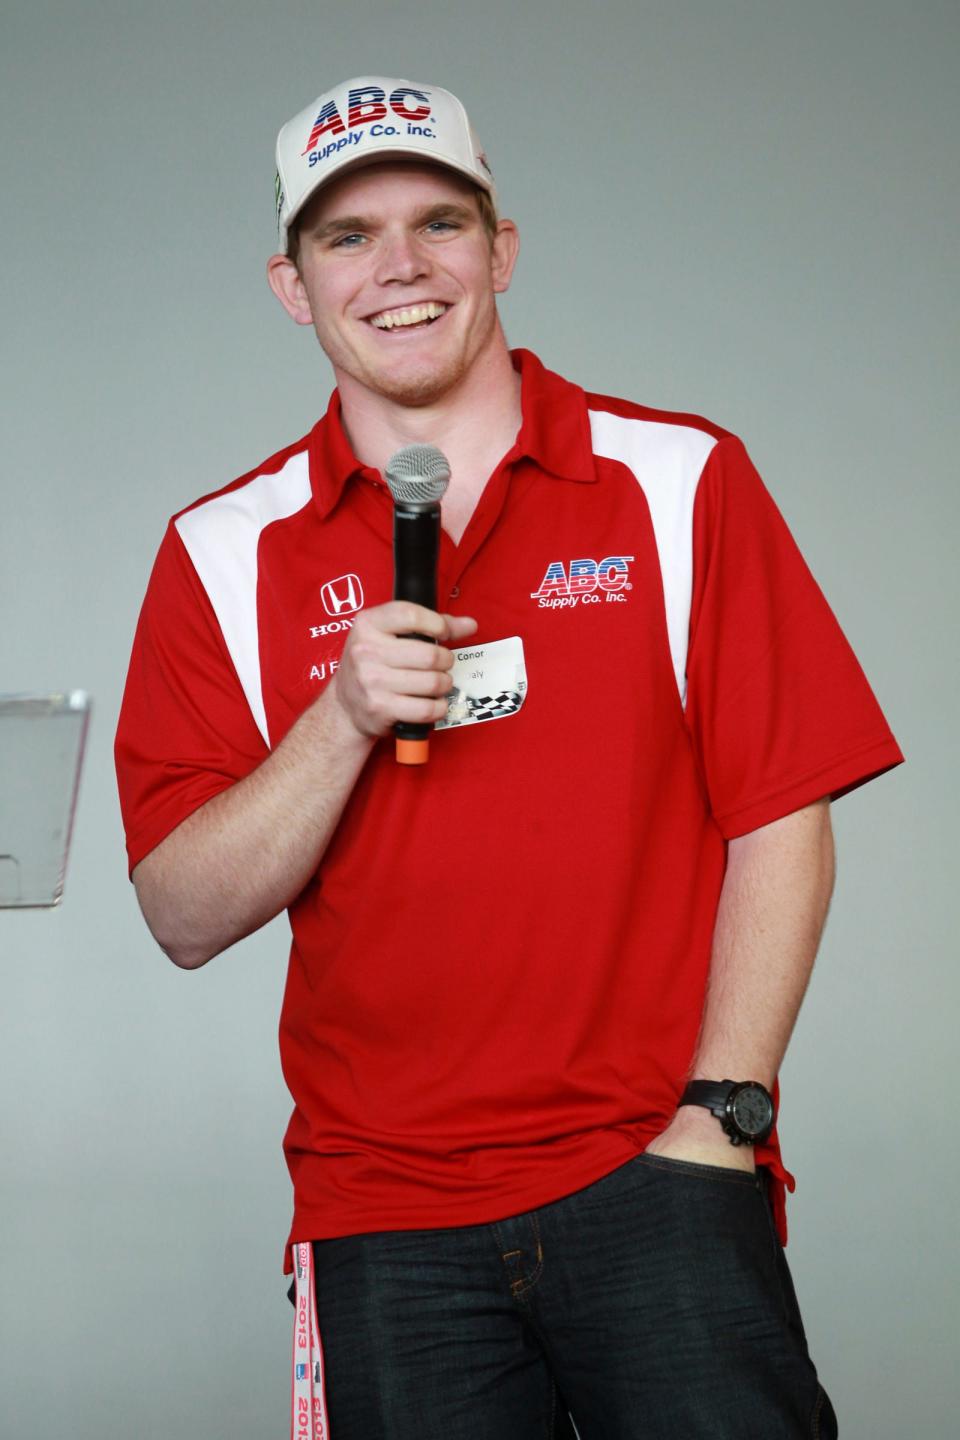 Conor Daly, who drove for A.J. Foyt in the 2013 Indianapolis 500, is one of many young drivers pursuing an IndyCar Series ride for next season.